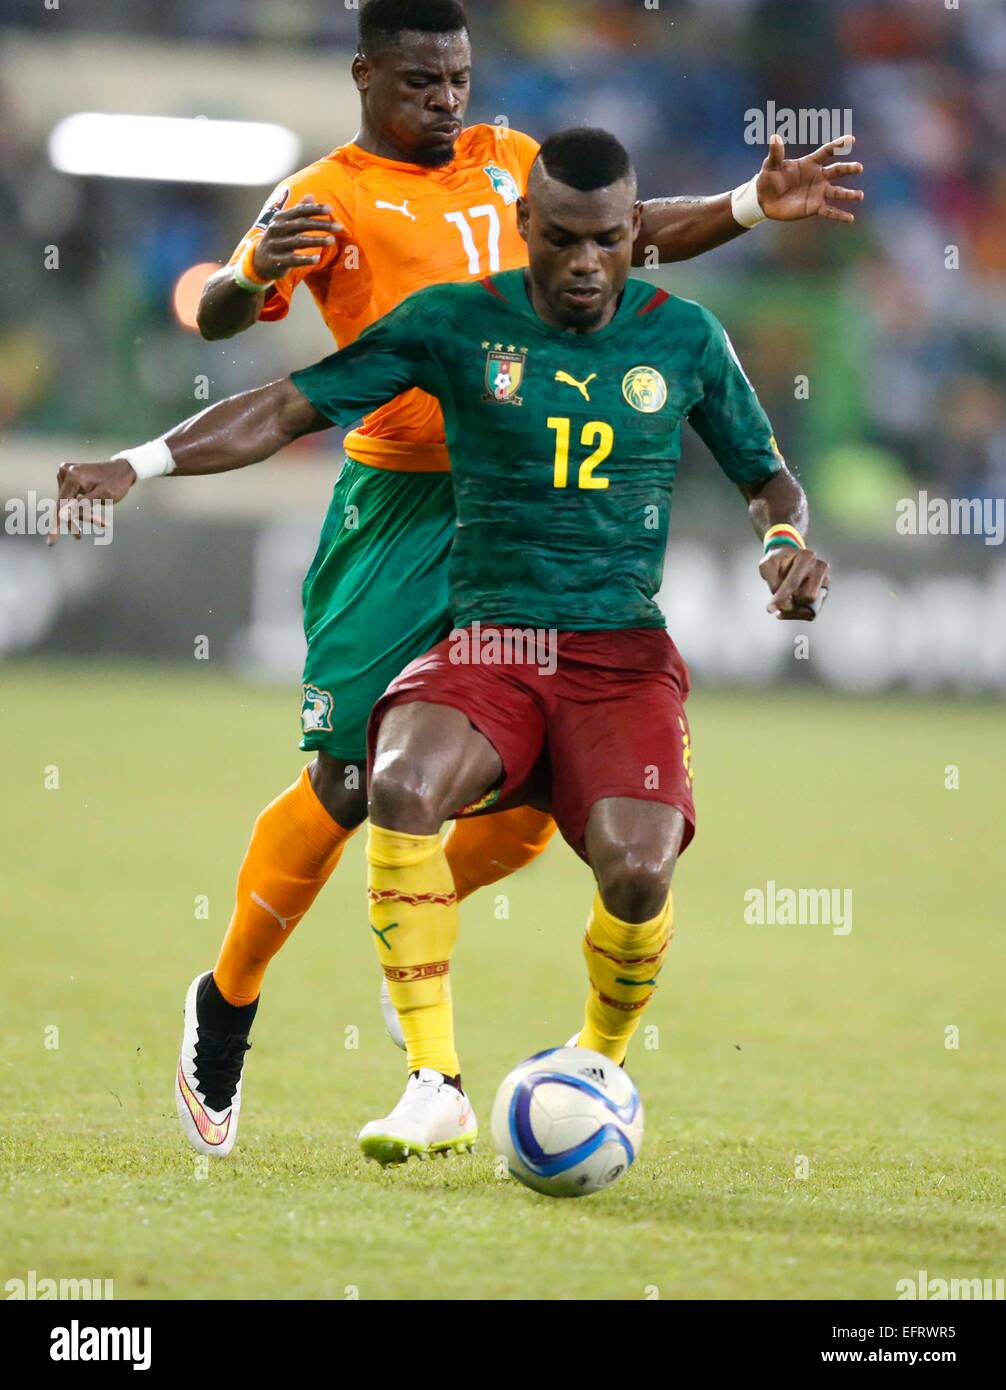 Henri Bedimo of Cameroon shields the ball from Serge Alain Stephane of Cote de Ivoire during their AFCON group D match at Estadio de Malabo in Equatorial Guinea on January 28, 2015. Cote de Ivoire won 1-0. Photo/Mohammed Amin/www.pic-centre.com (Equatoria Stock Photo